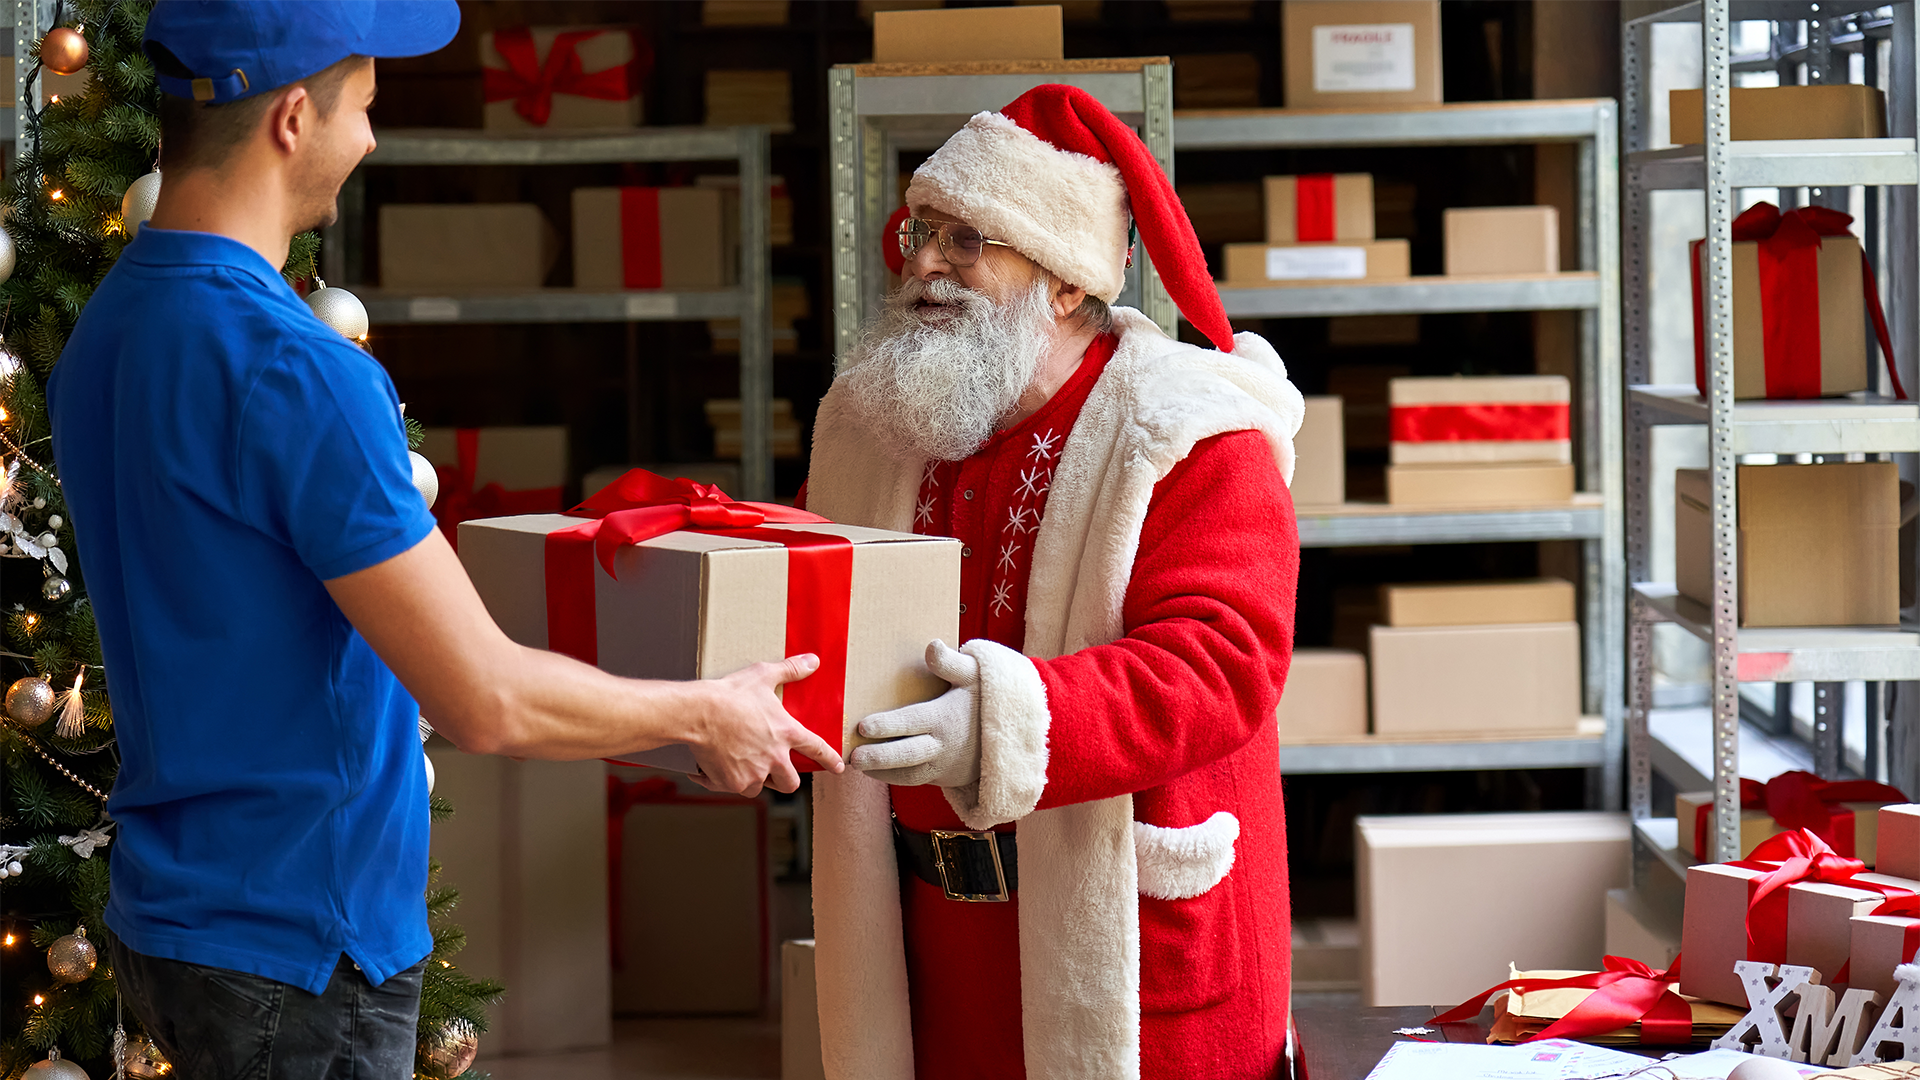 Christmas and end of 2021 - the main e-commerce fulfillment challenges